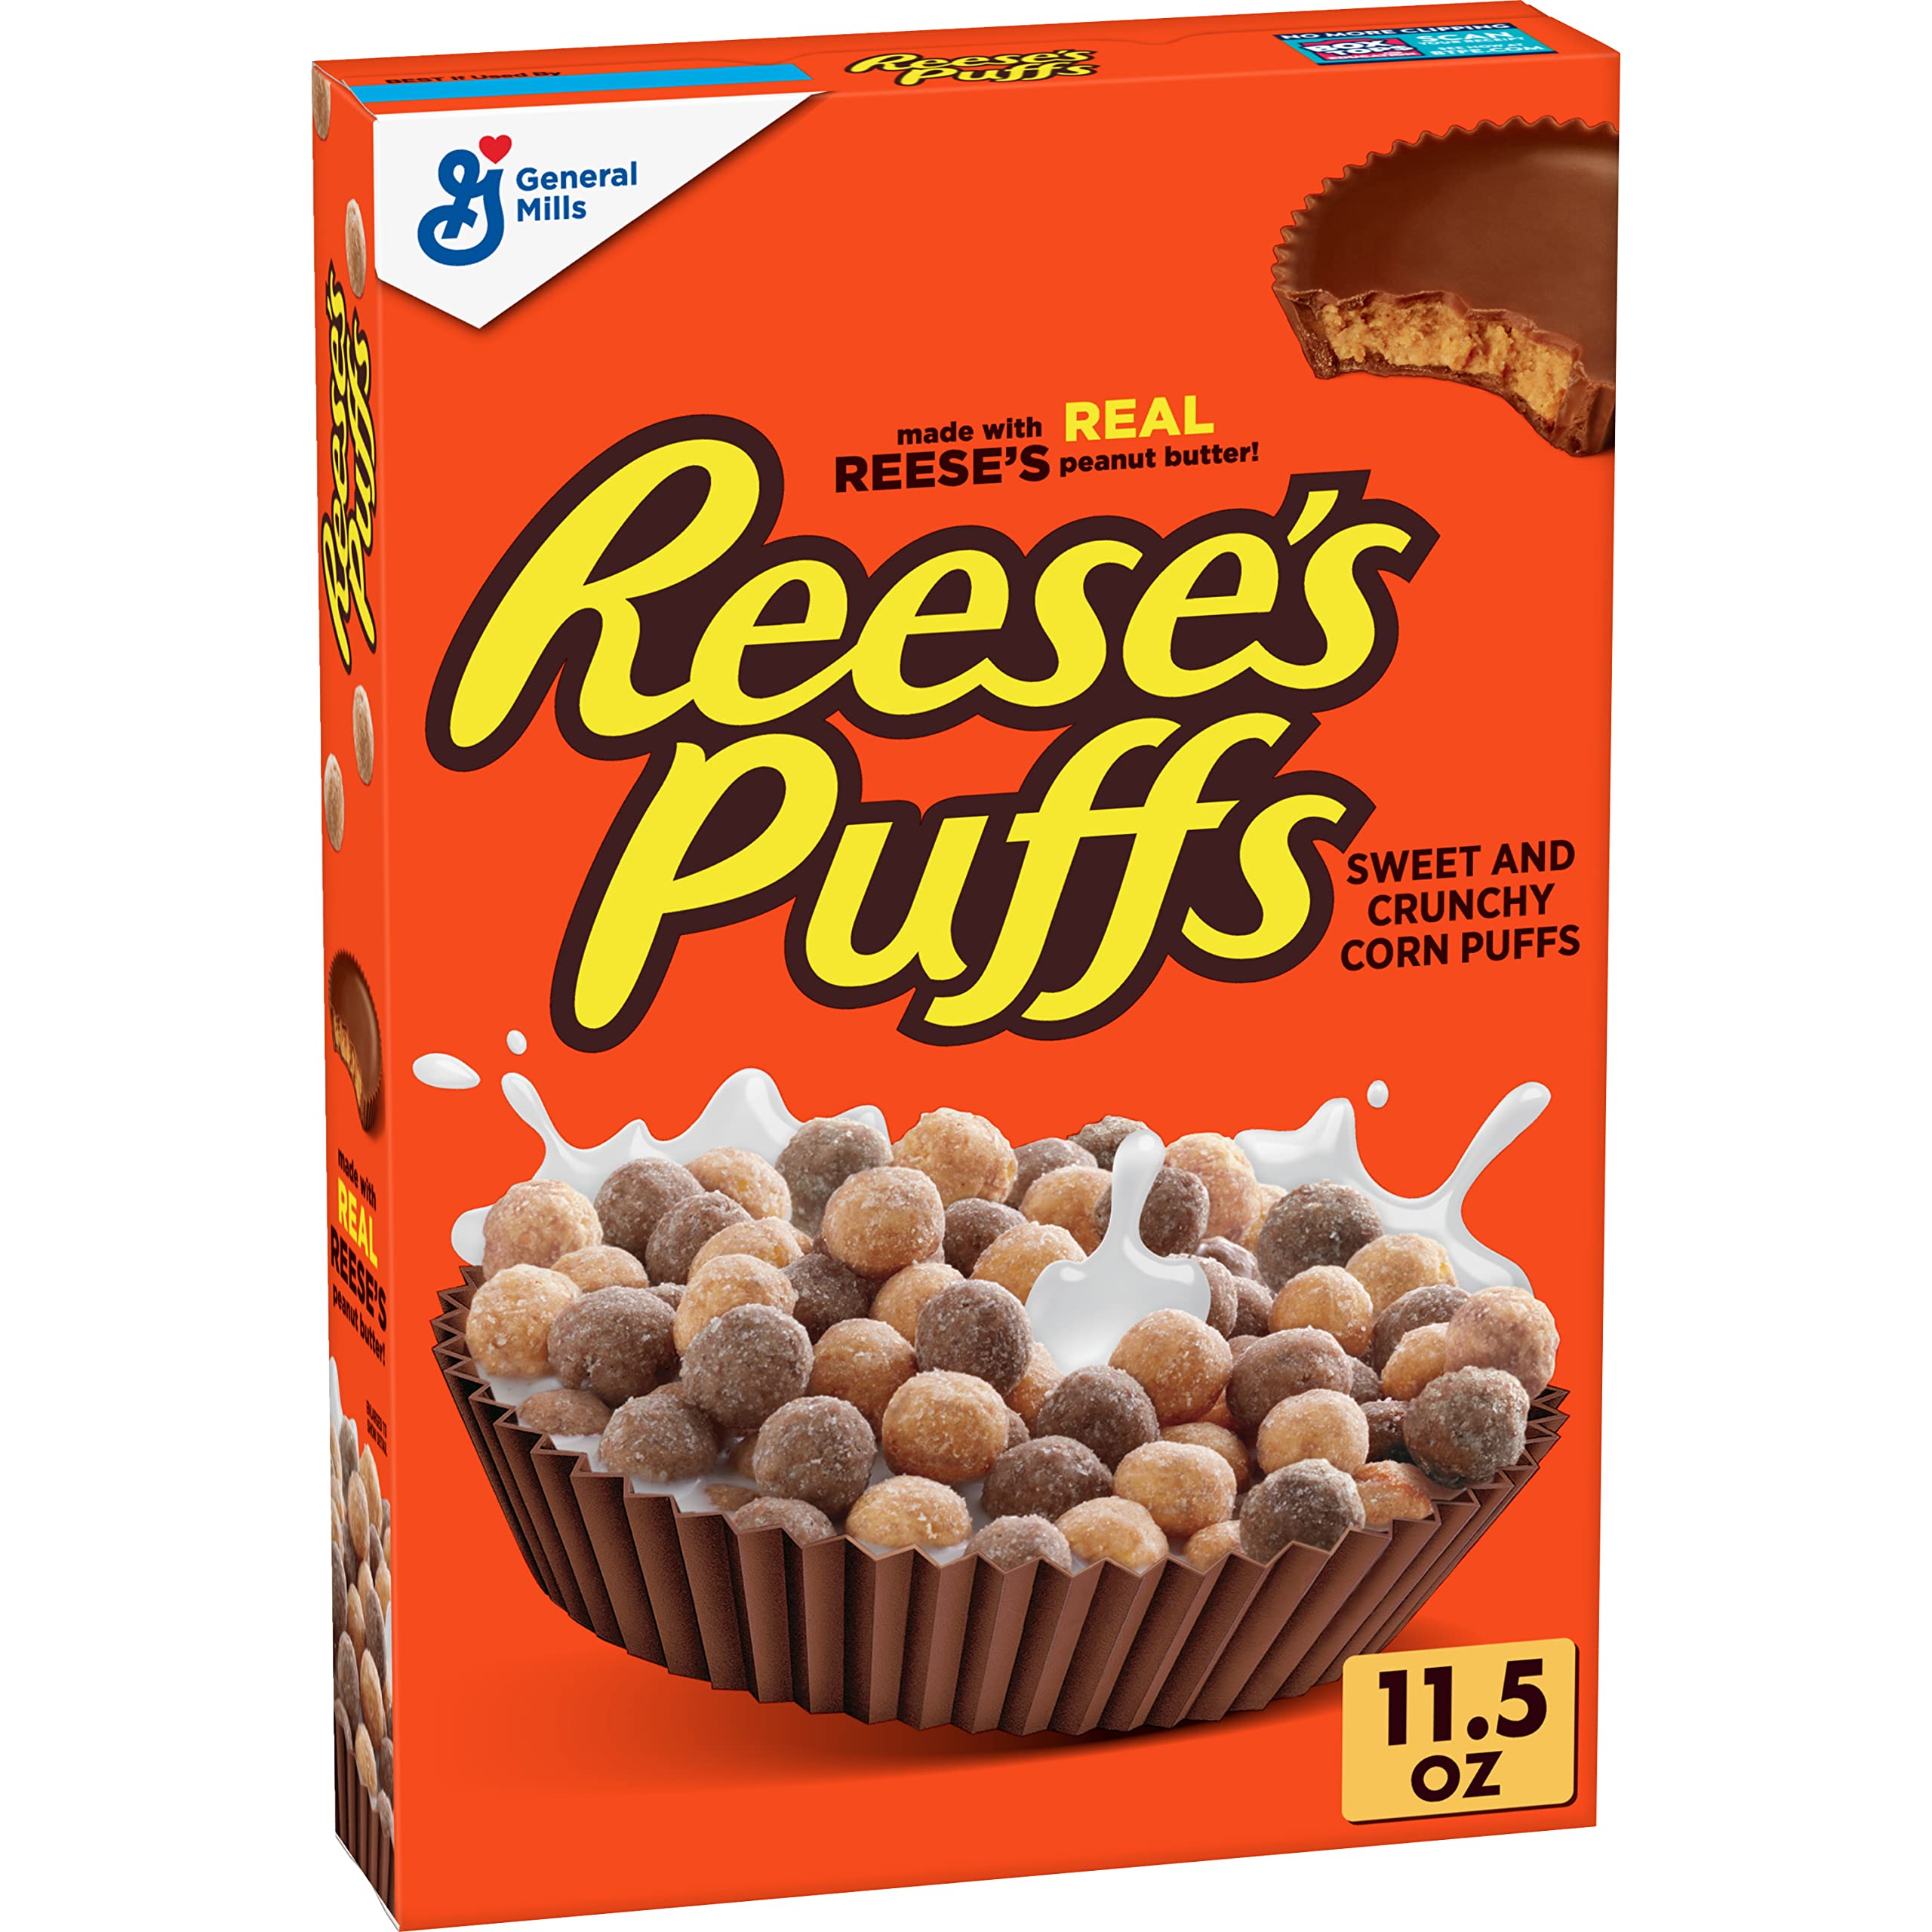 Reese's Puffs Cereal 11.5 oz $2.46 at Amazon